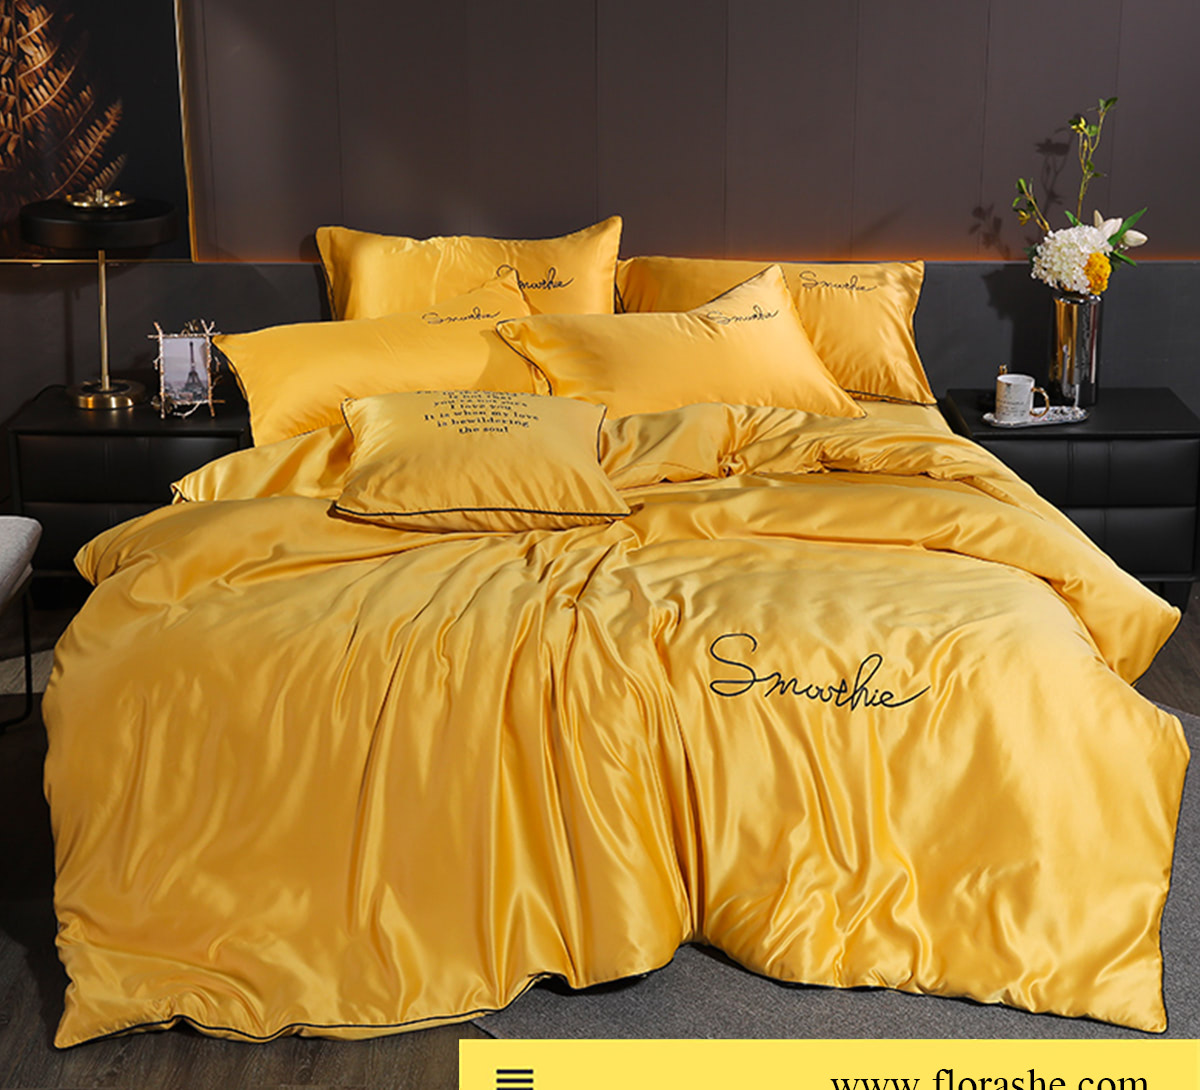 Sexy-Solid-Color-Silky-Satin-Duvet-Cover-Bedding-Set-4-Pcs23